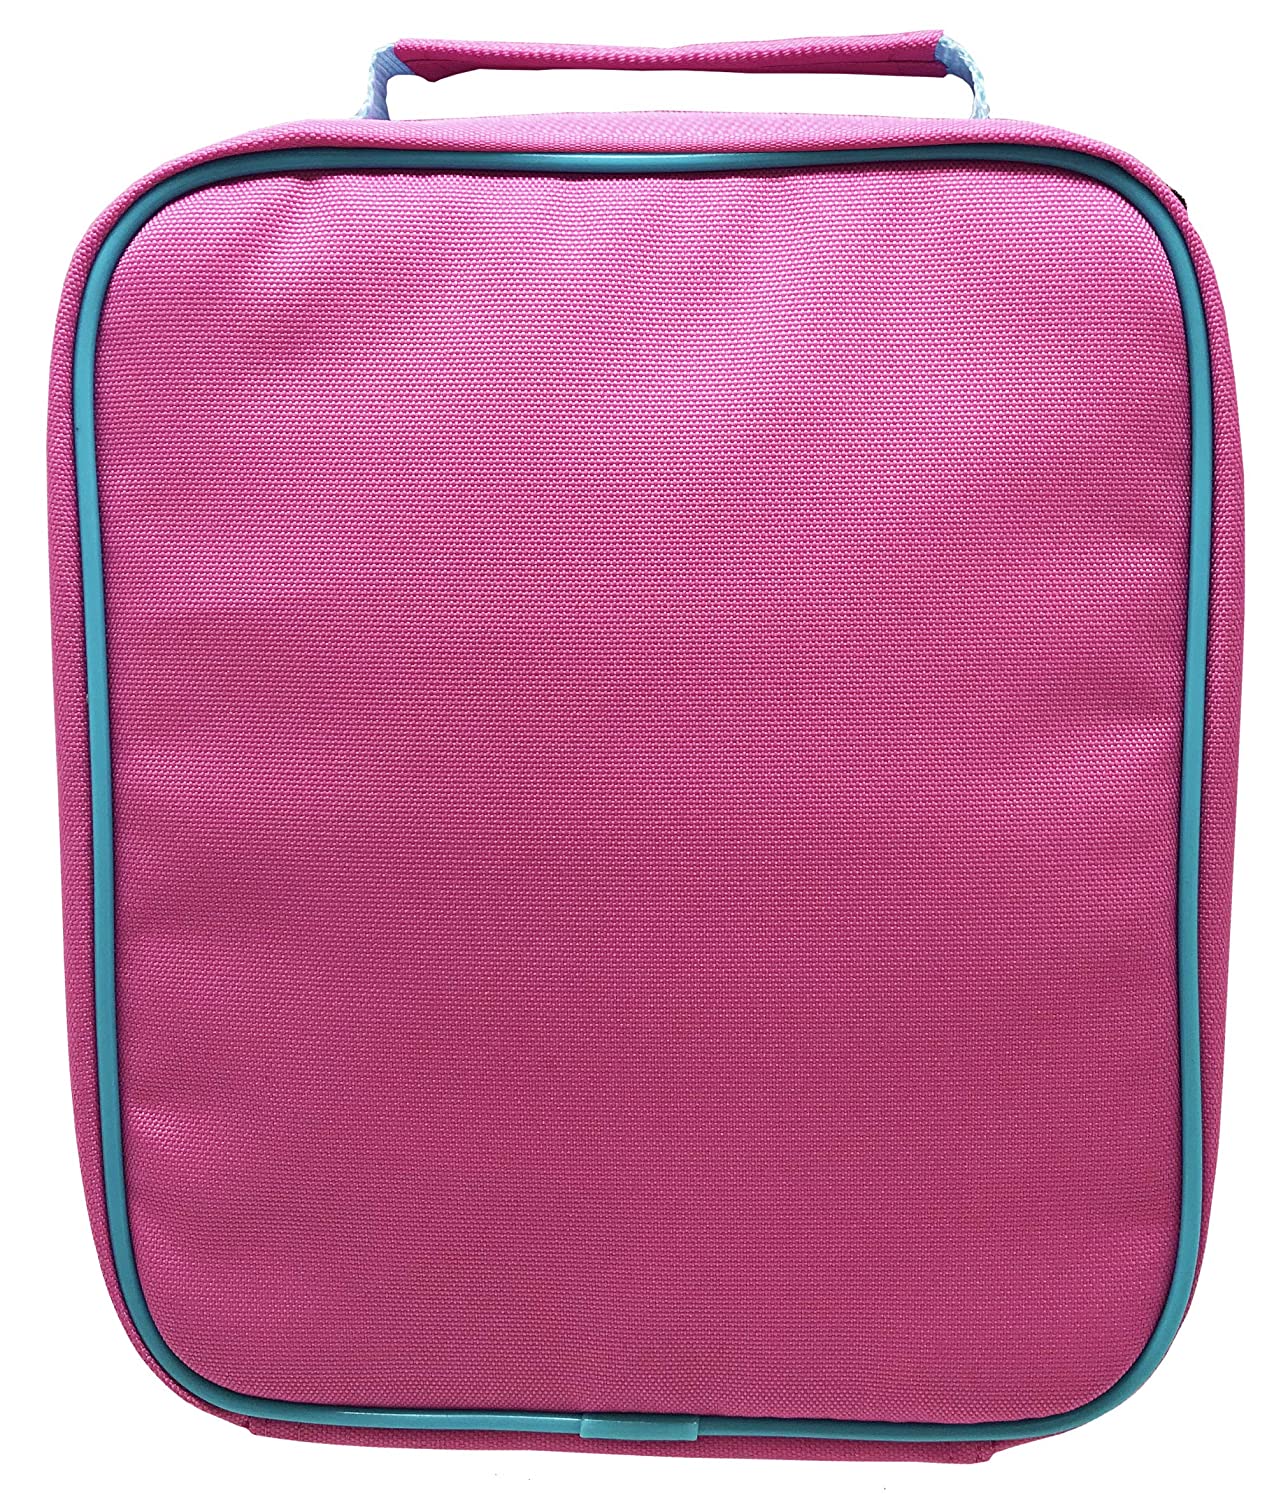 Princess Sparkly Pink School Premium Lunch Bag Insulated 5039388067461